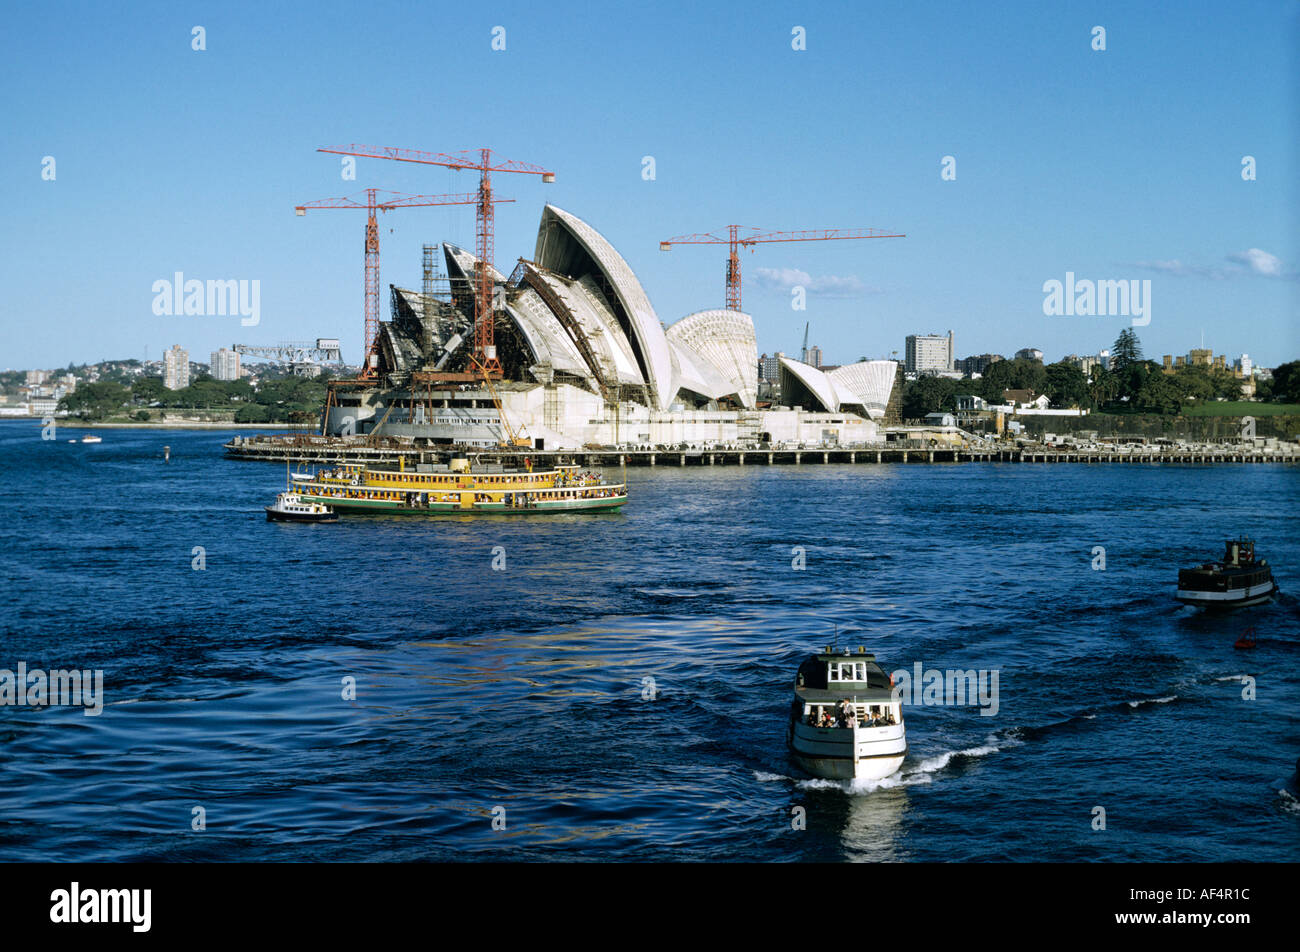 Sydney Opera House Under Construction Viewed From The Harbour In